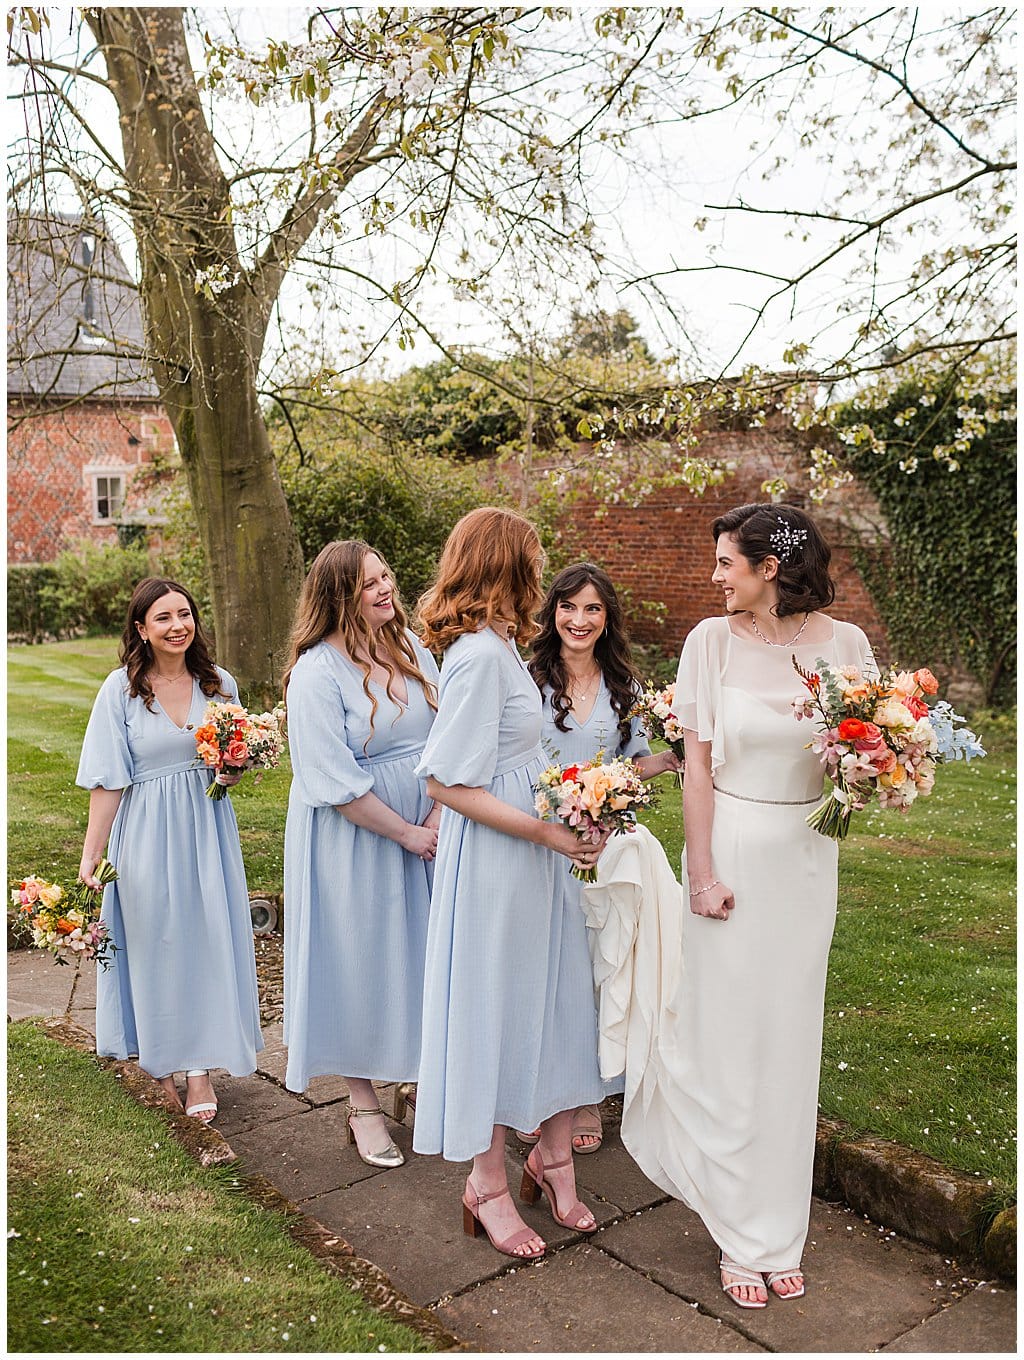 Bridesmaids wearing pale blue dresses, walking with the Bride in Spring gardens at Pimhill Barn